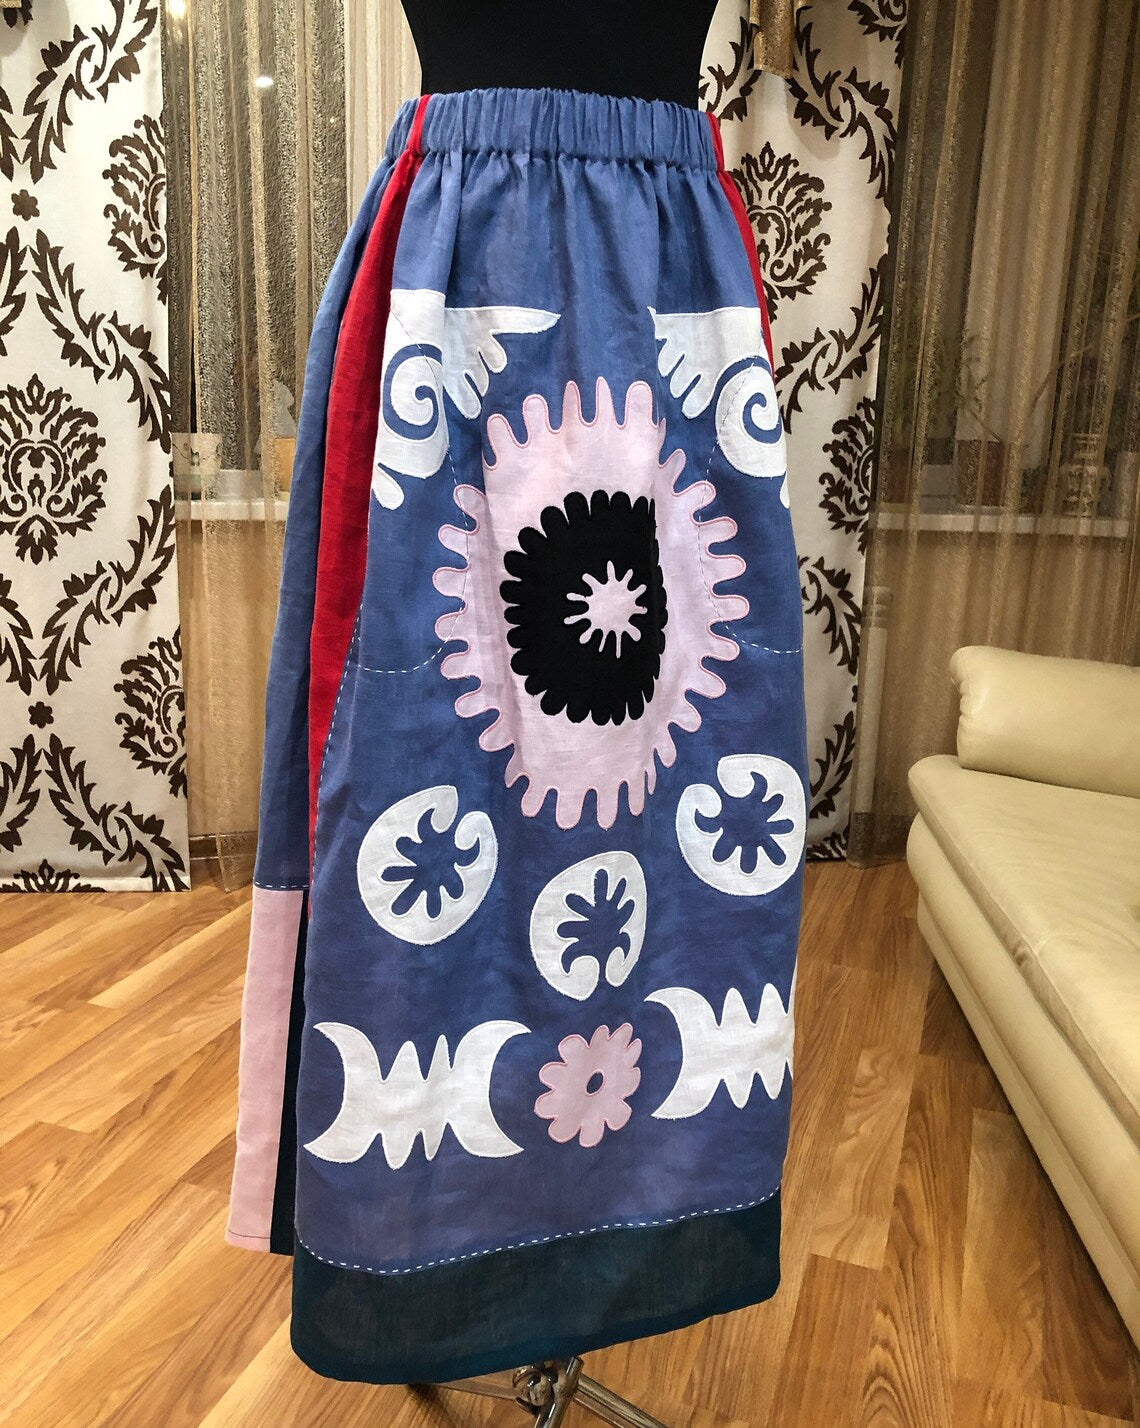 Embroidered skirt with applique marlborough embroidery Color block fashion skirt